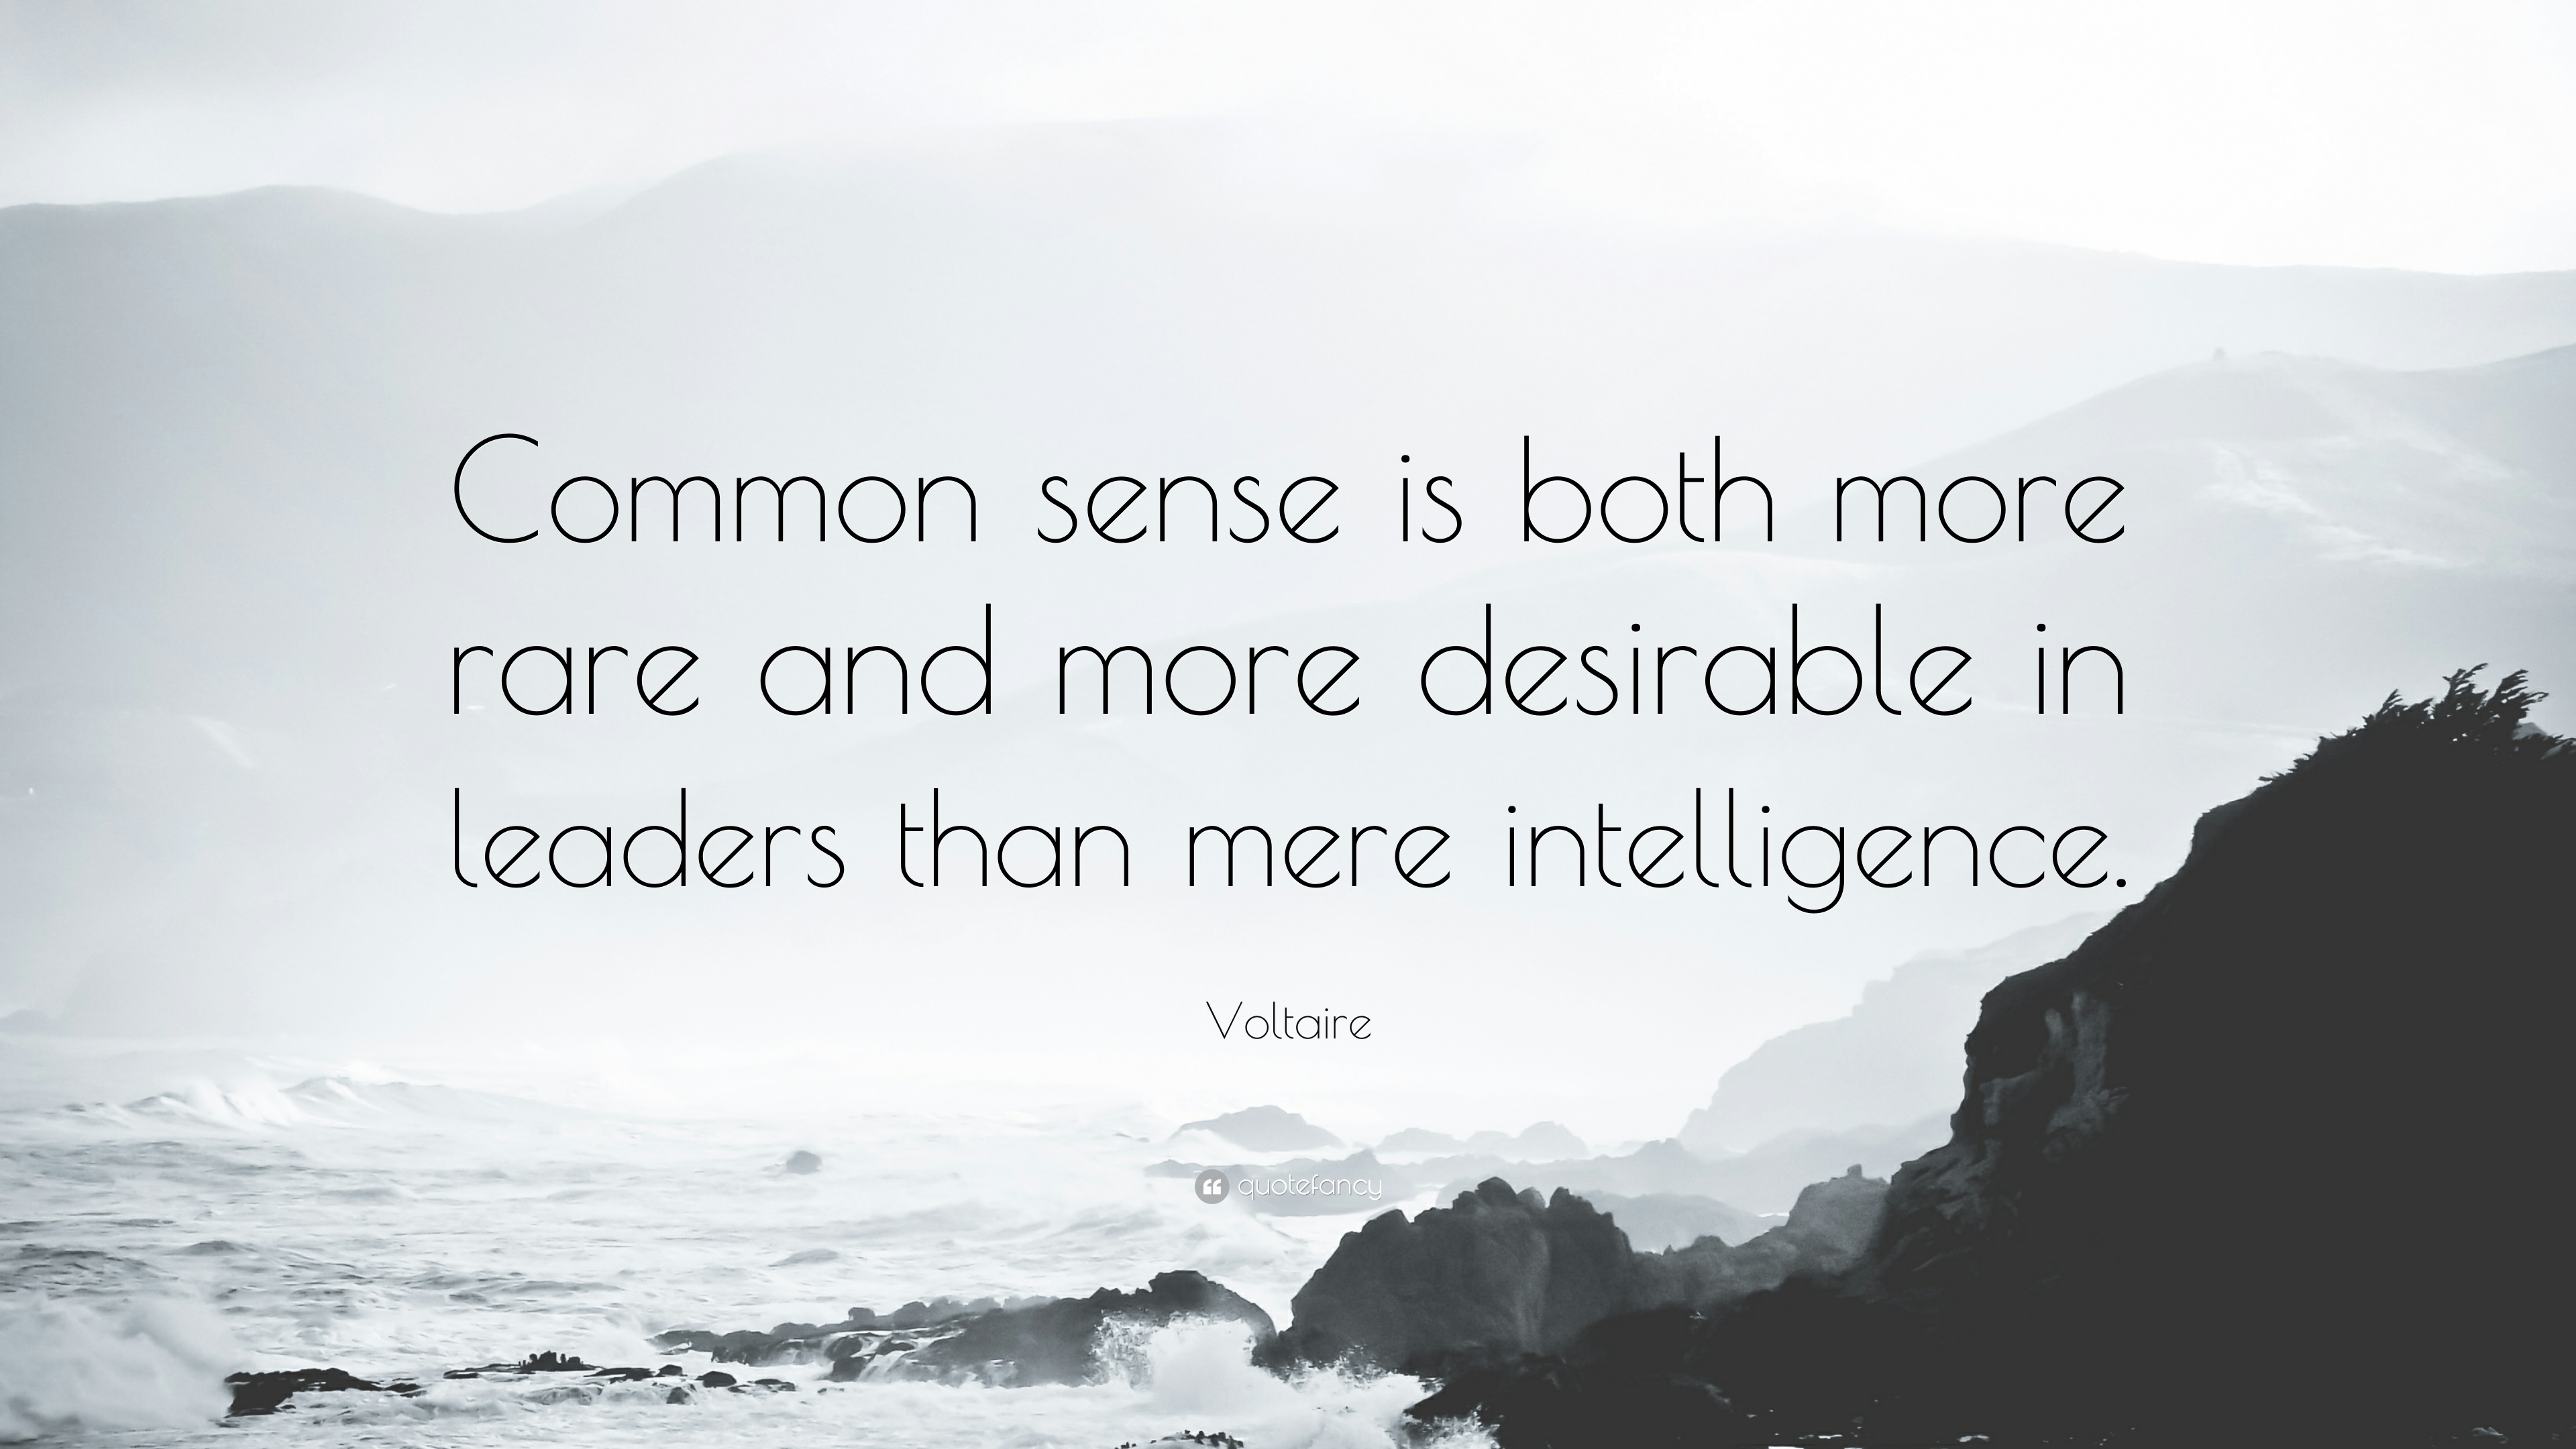 Voltaire Quote Common sense is both more rare and more desirable